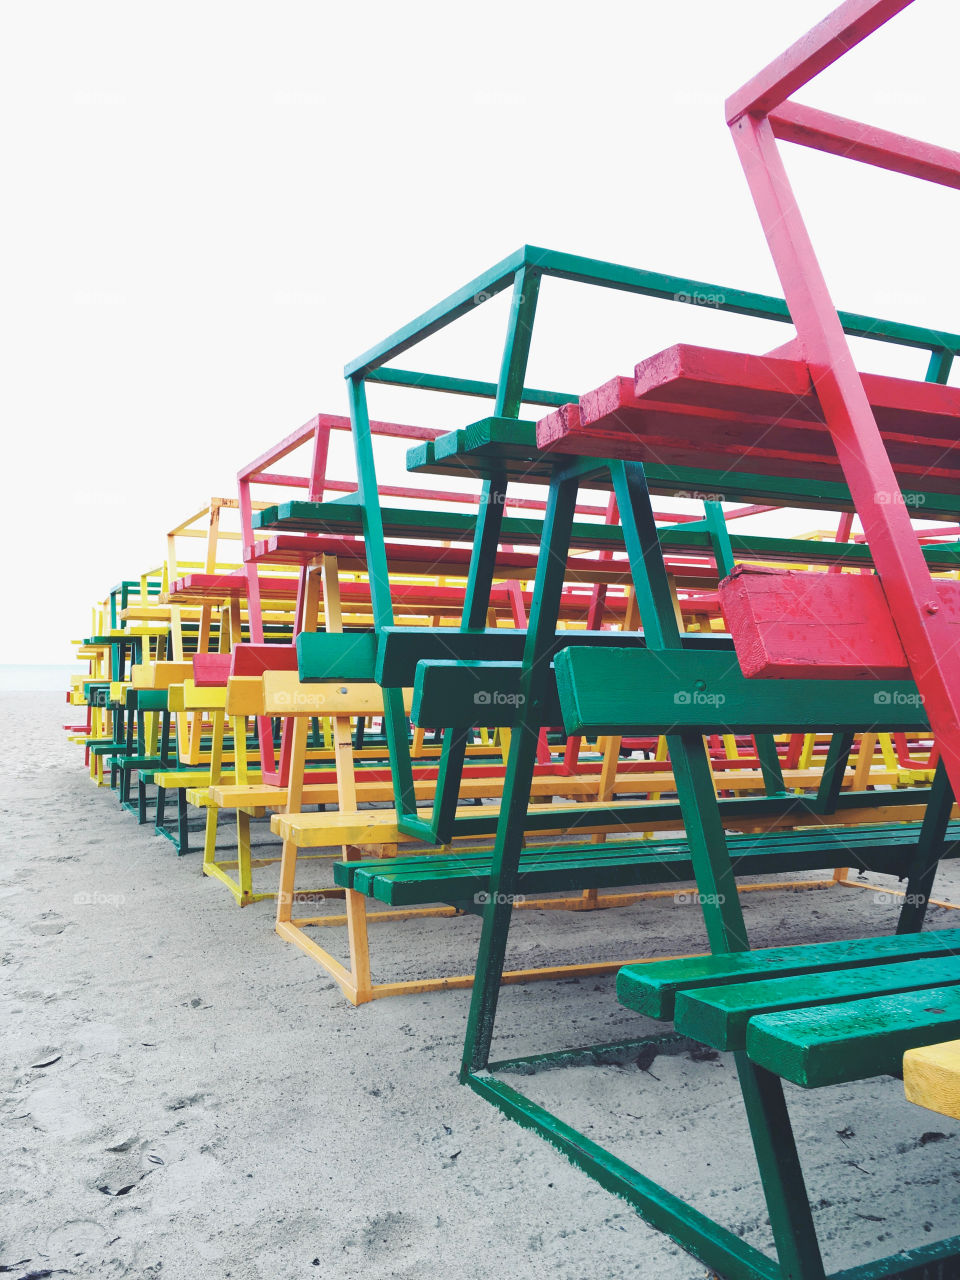 Bright and colourful wooden benches stacked together at a beach.